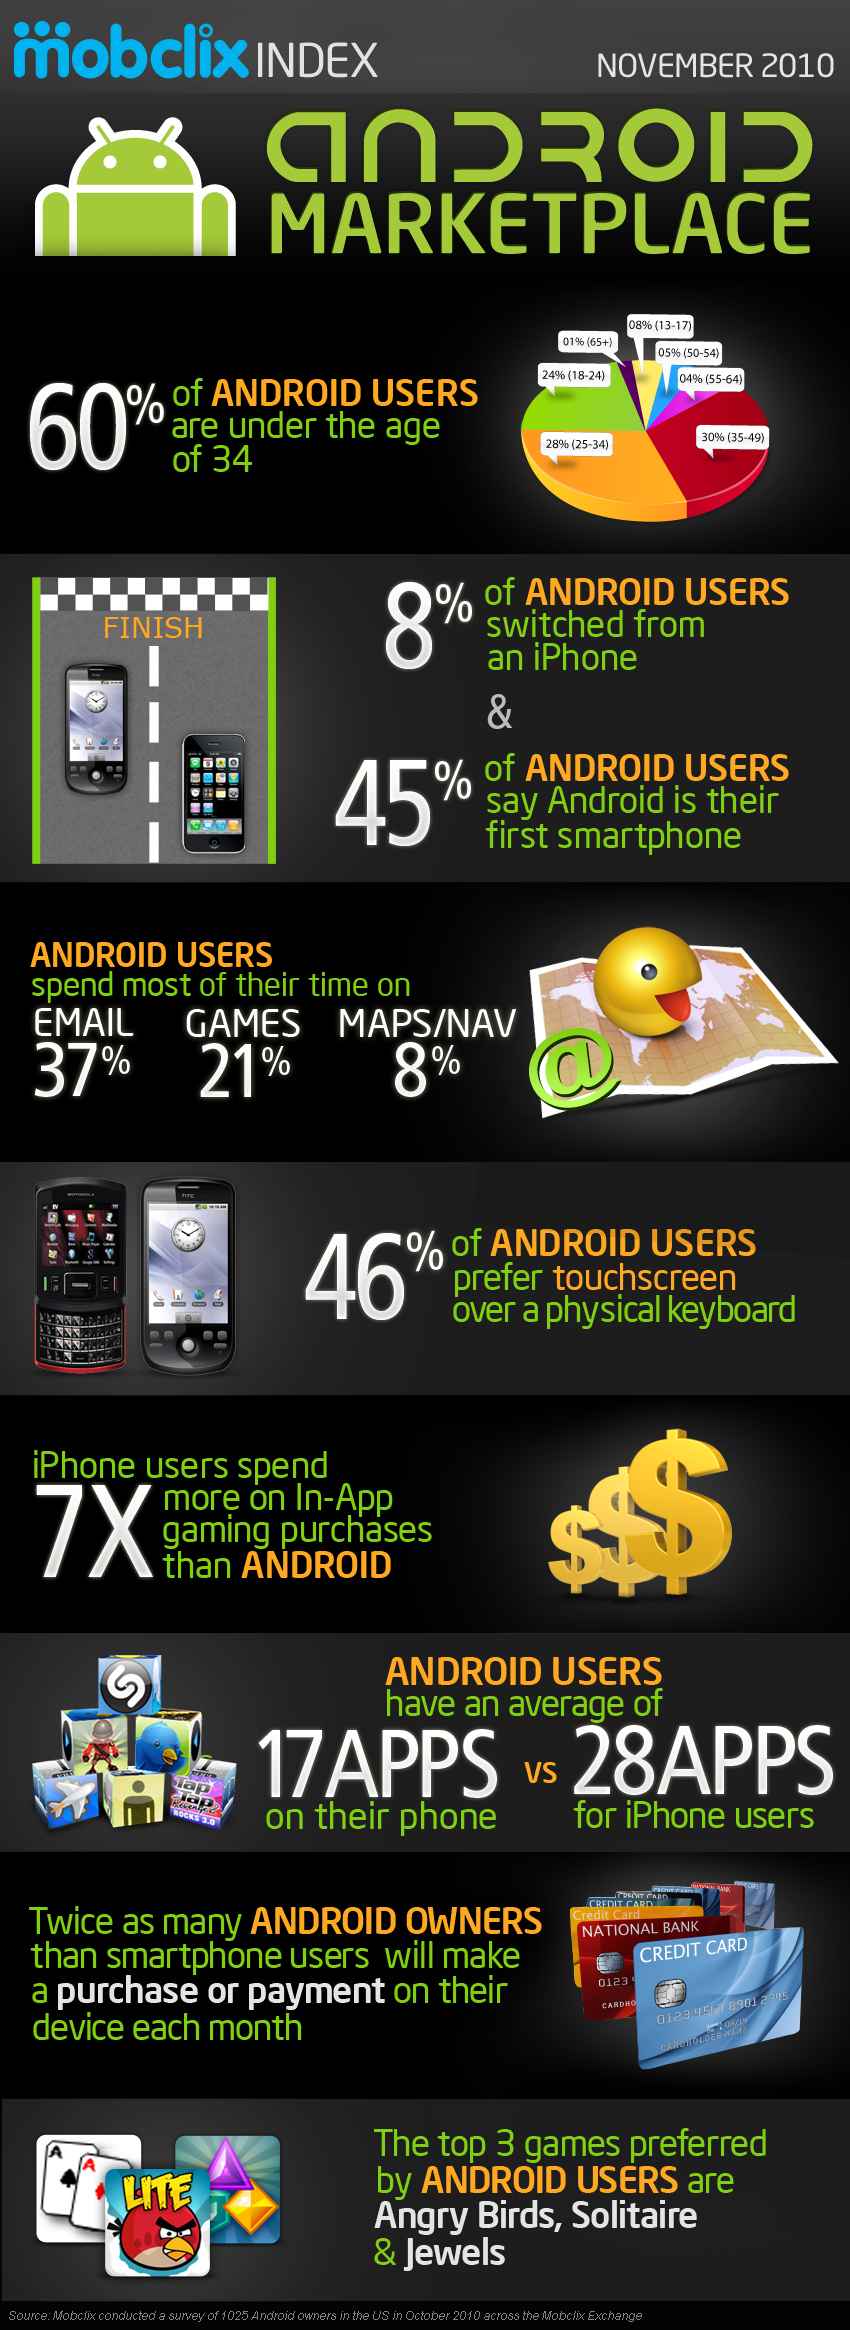 http://www.android-navi.com/Android-Infographic_Nov-20101.jpg